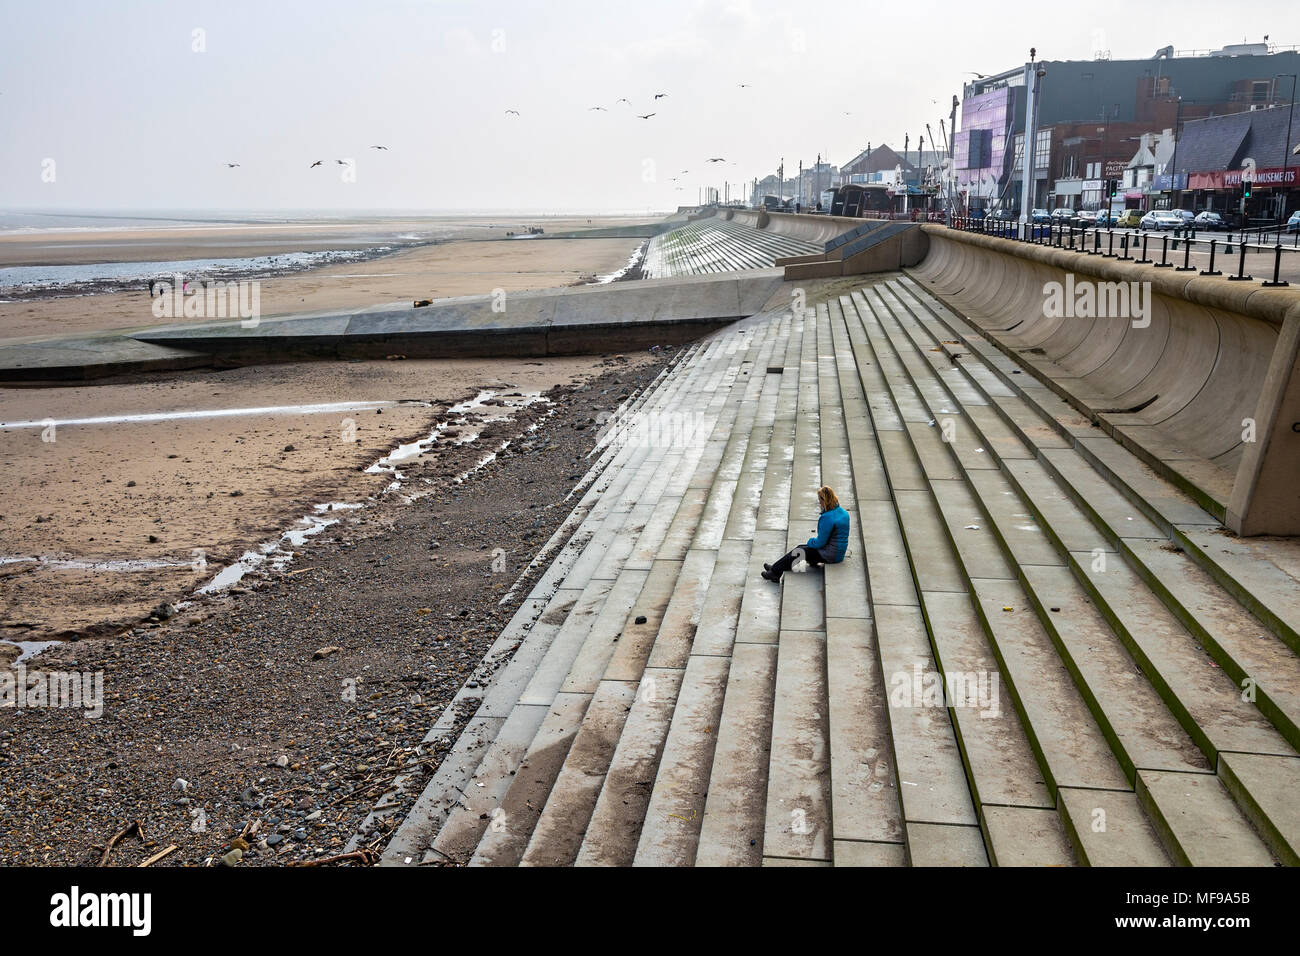 A Woman Sits Alone on the Steps of an Out Of Season Seaside Town (Concept Shot Posed by Model). Stock Photo